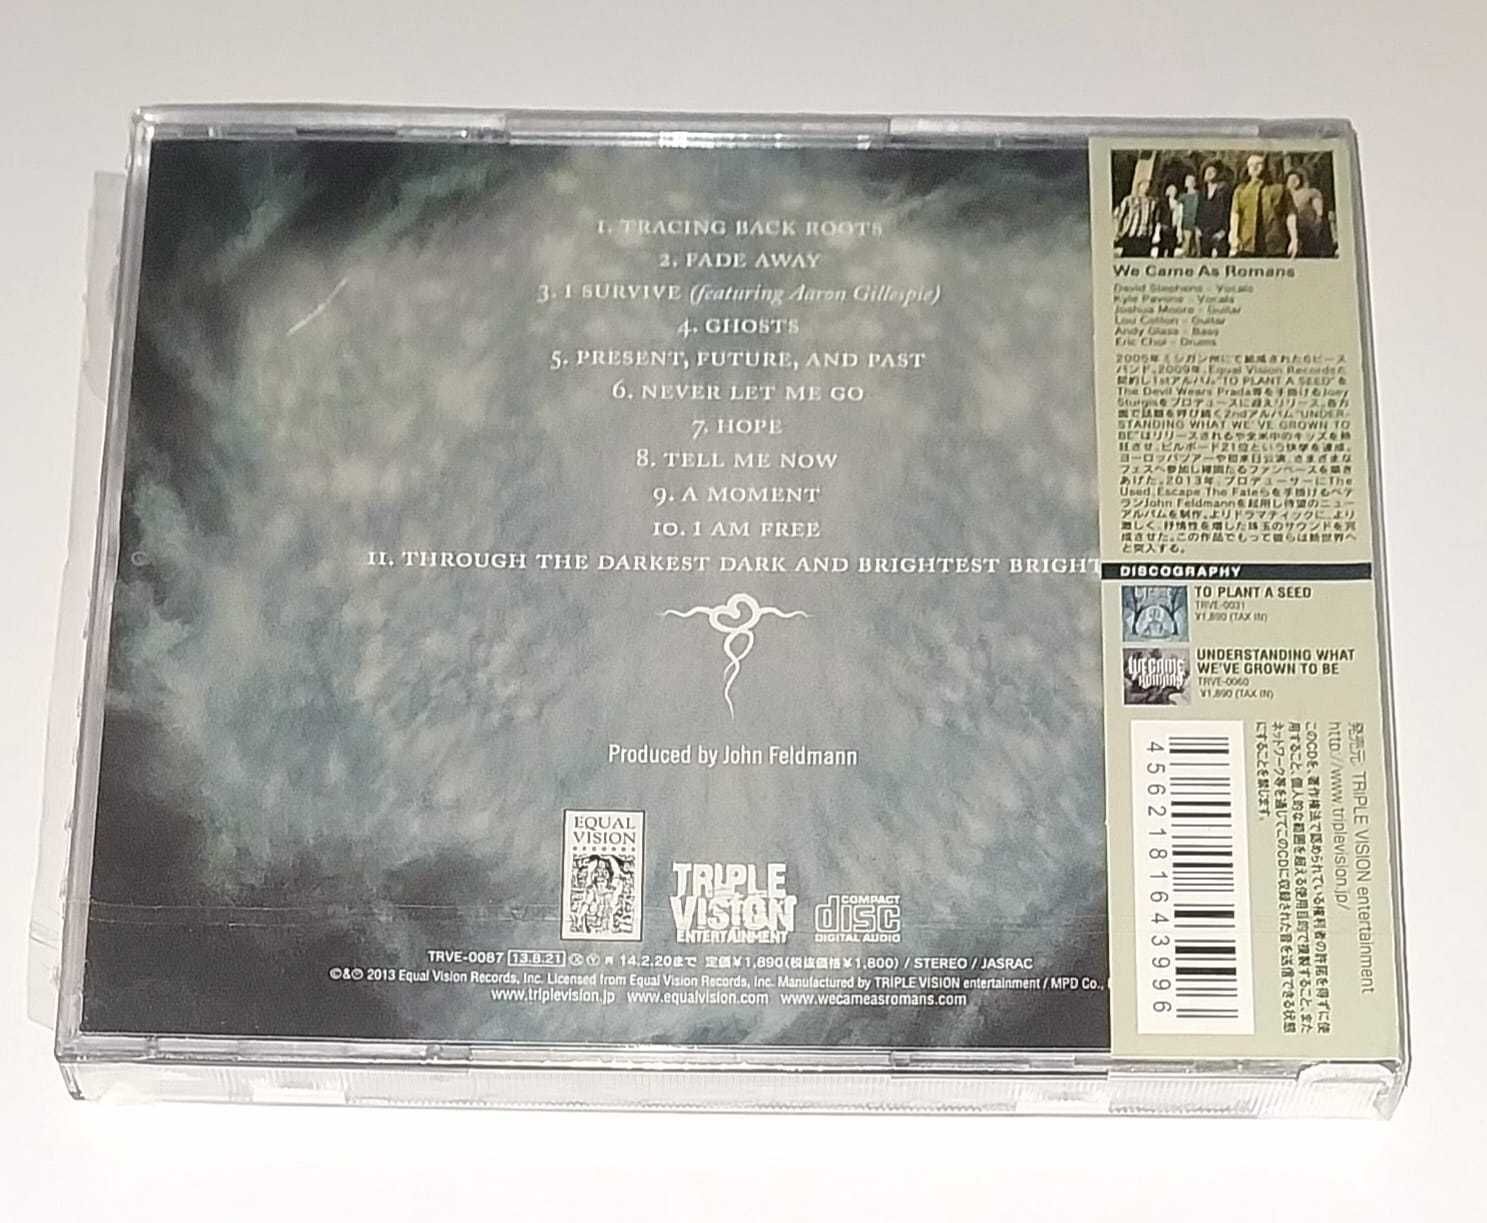 We Came As Romance - Tracing Back Roots CD japan edition